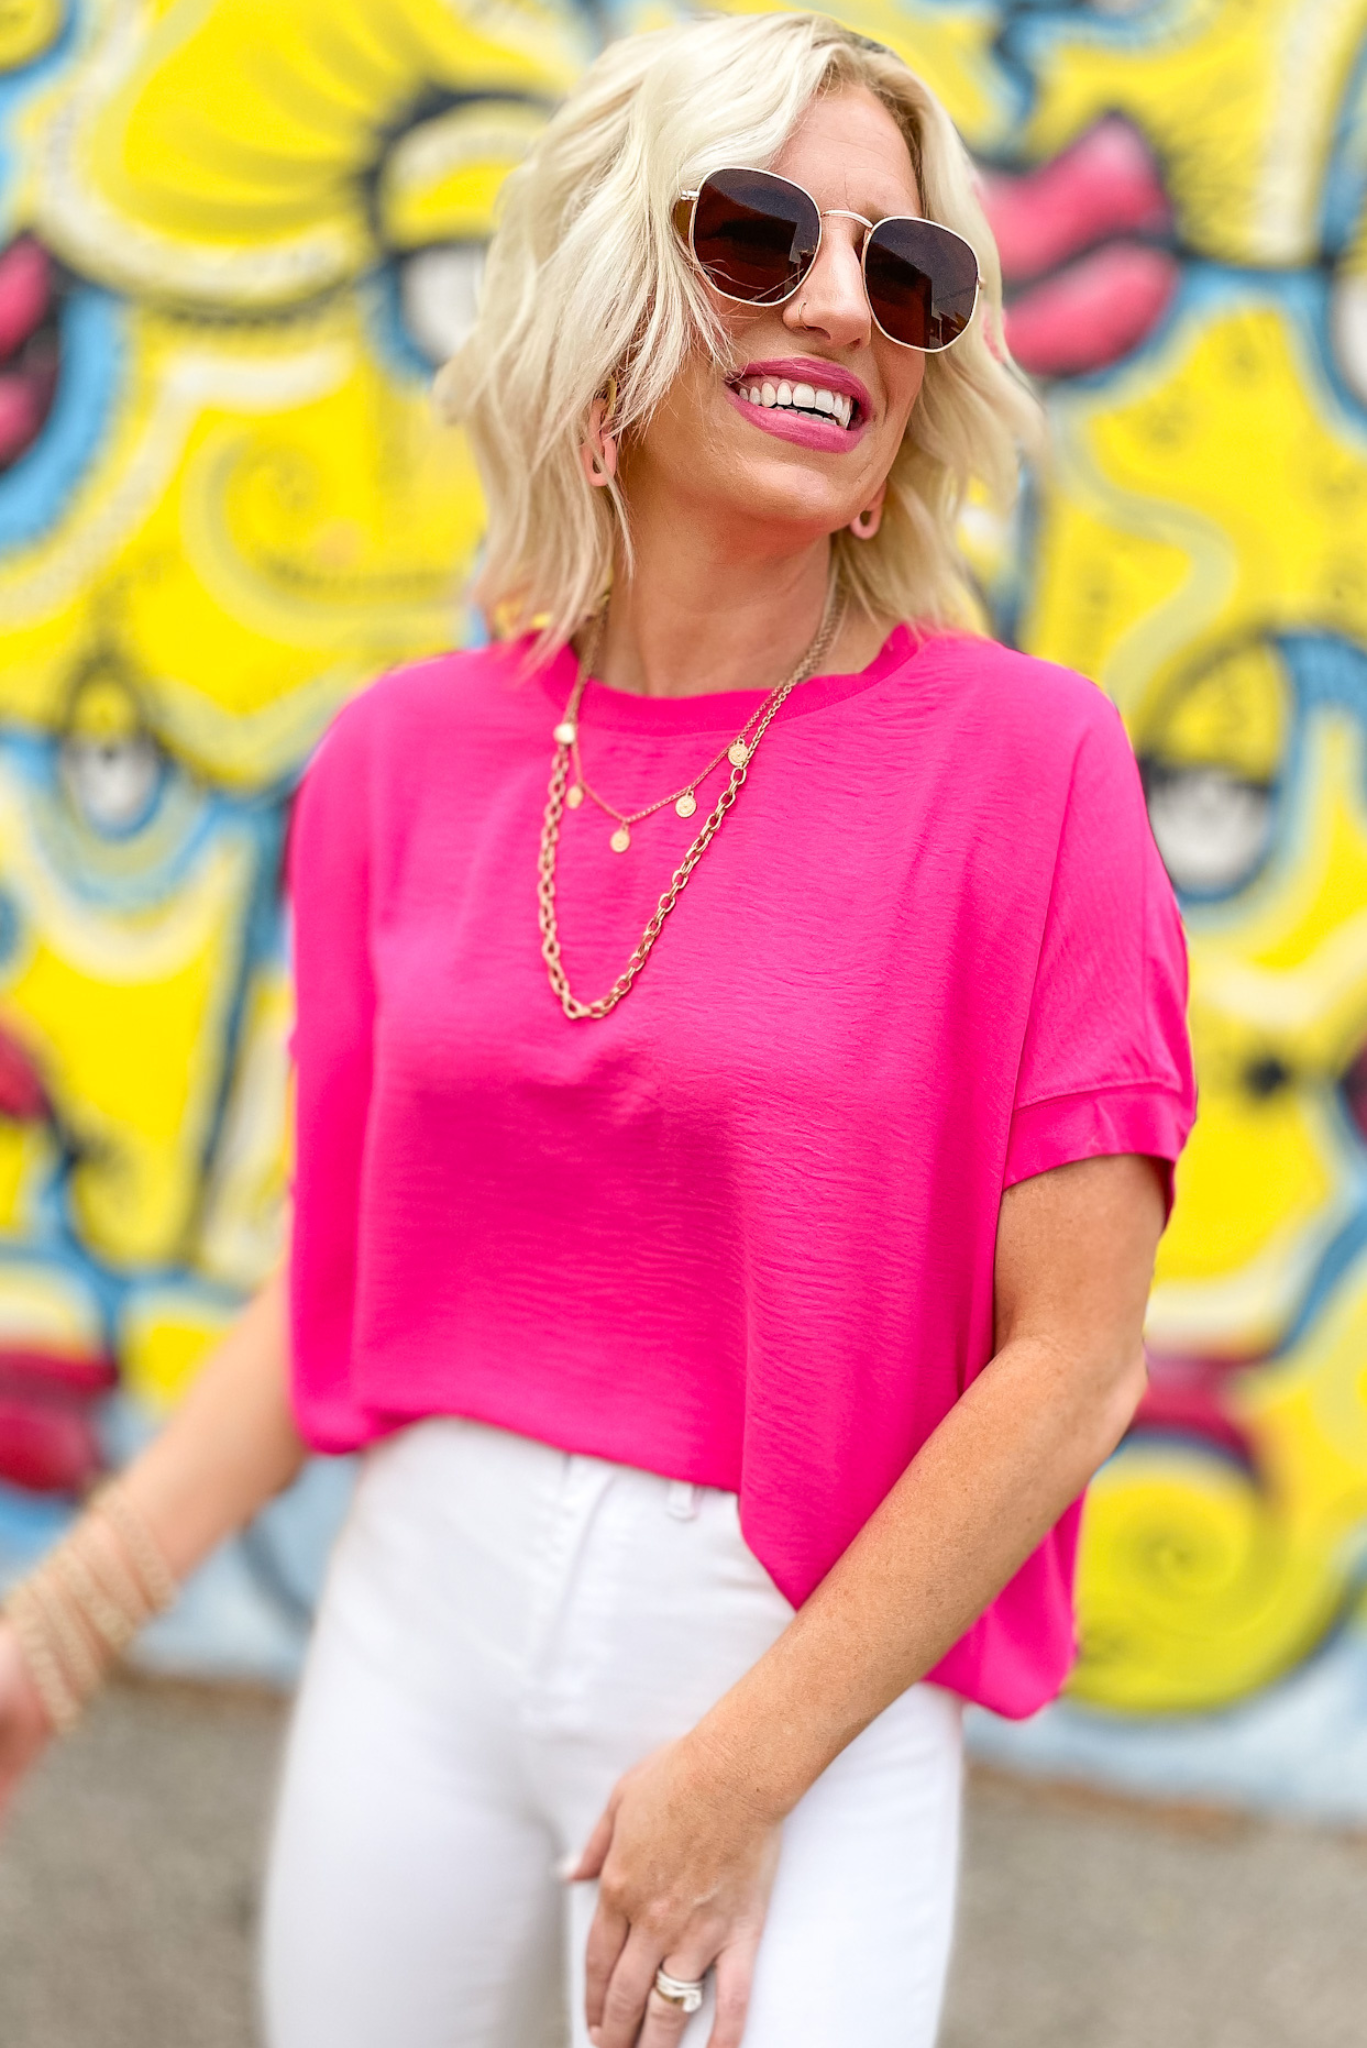 Hot Pink Round Neck Dolman Sleeve Top, dolman top, round neck, off white sleeve top, work to weekend, chic top, shop style your senses by mallory fitzsimmons